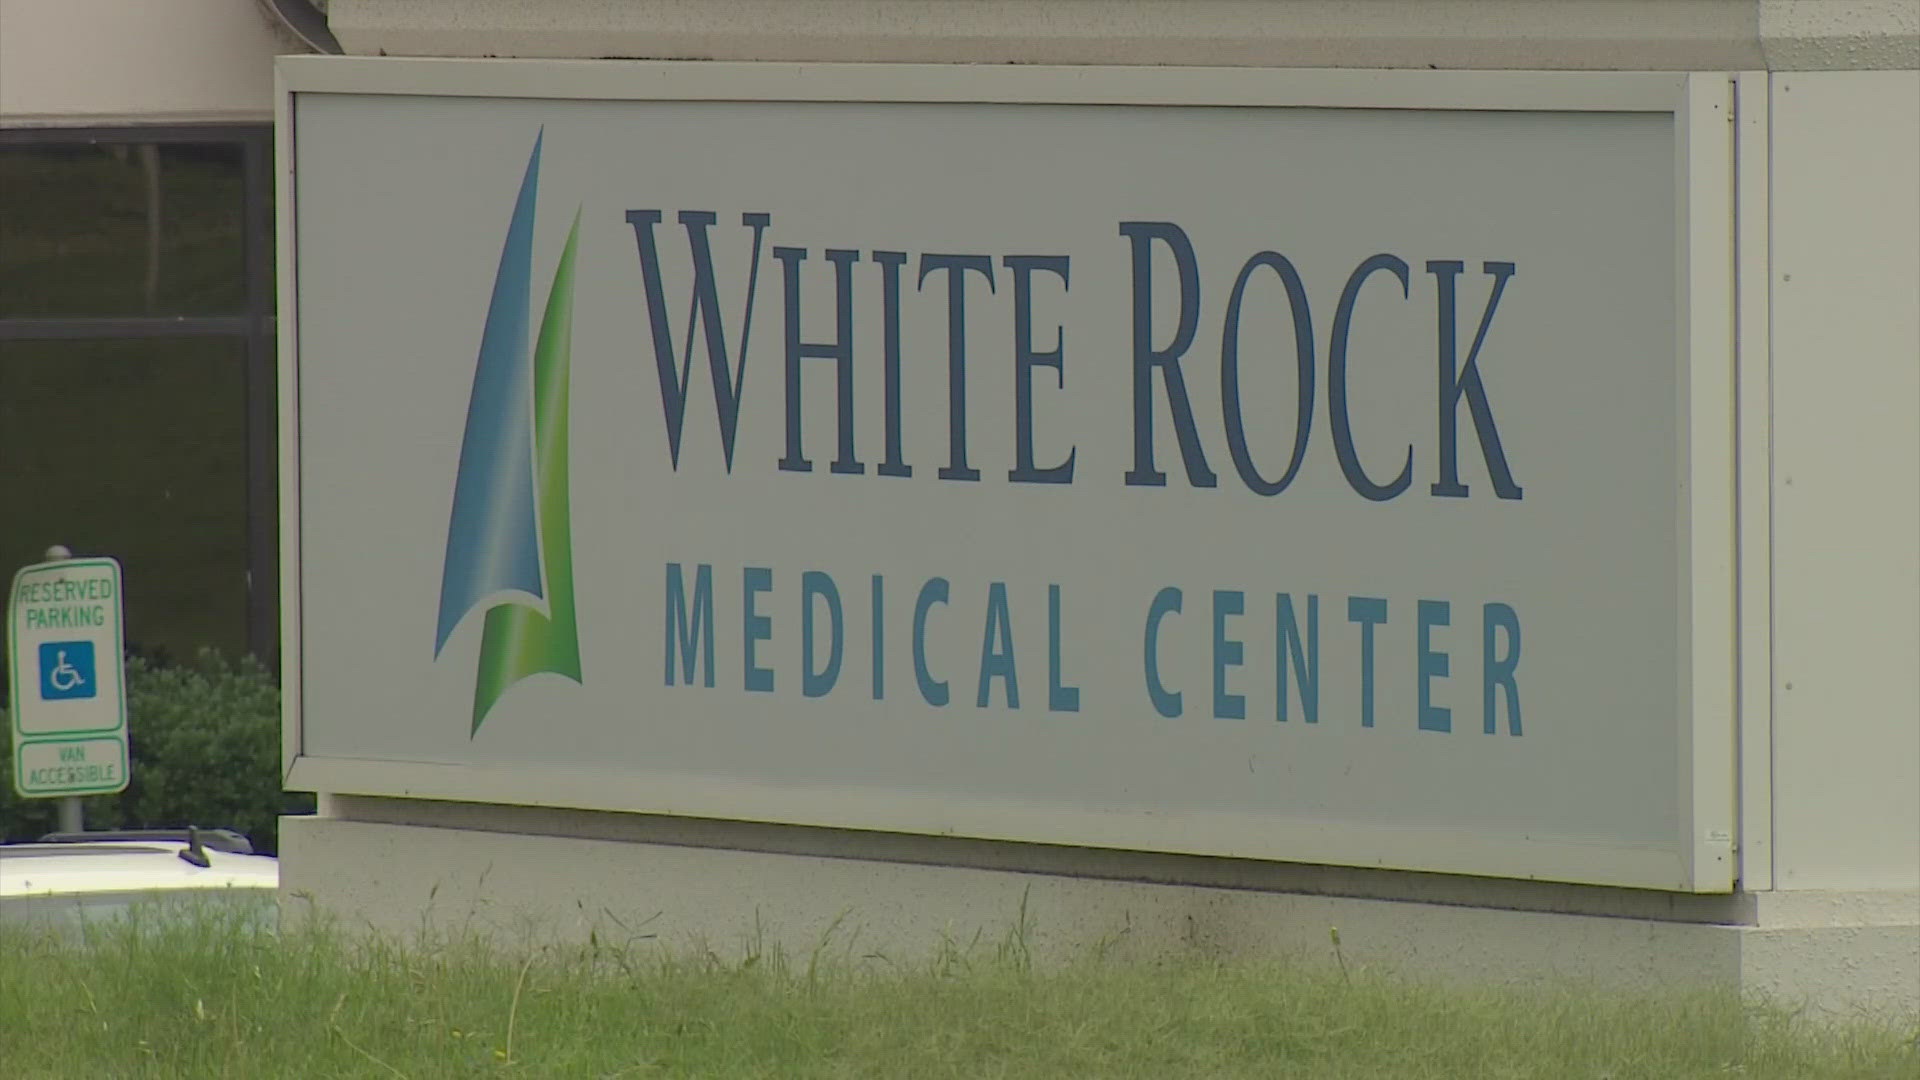 Laid-off employees say the White Rock Medical Center, formerly known as Doctors' Hospital, appeared to have significant financial issues